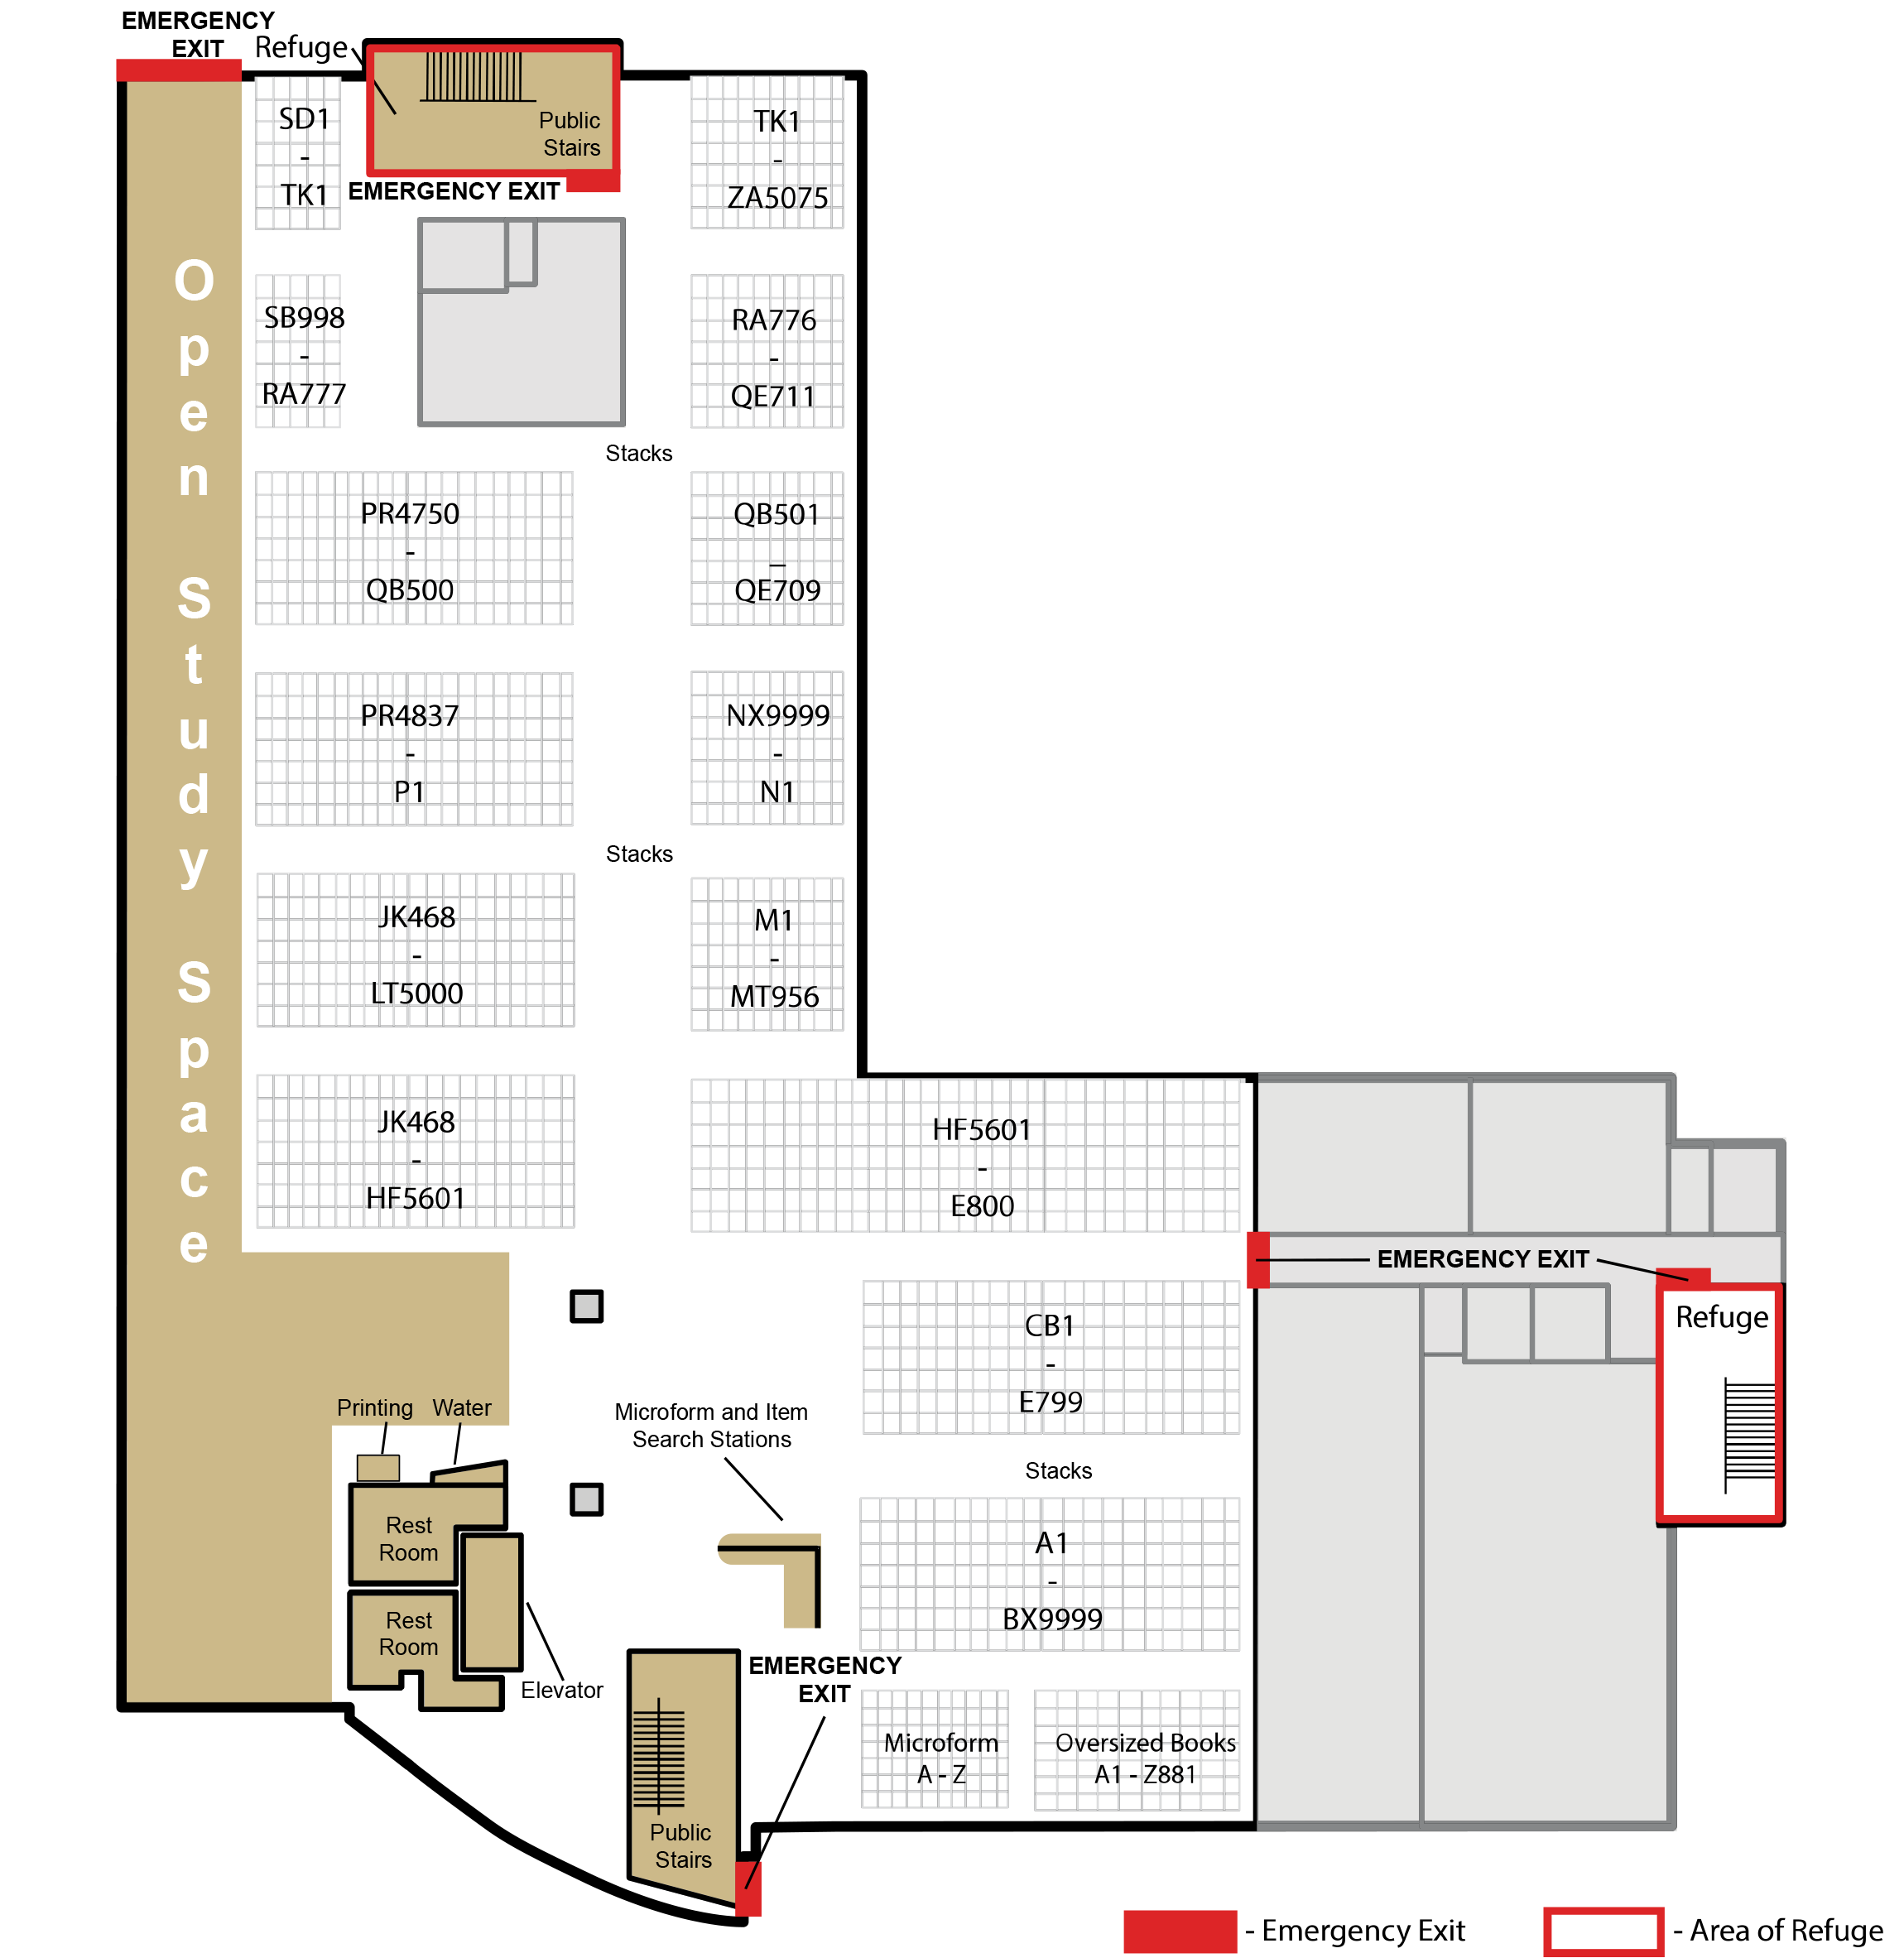 A map of the ground floor of the library